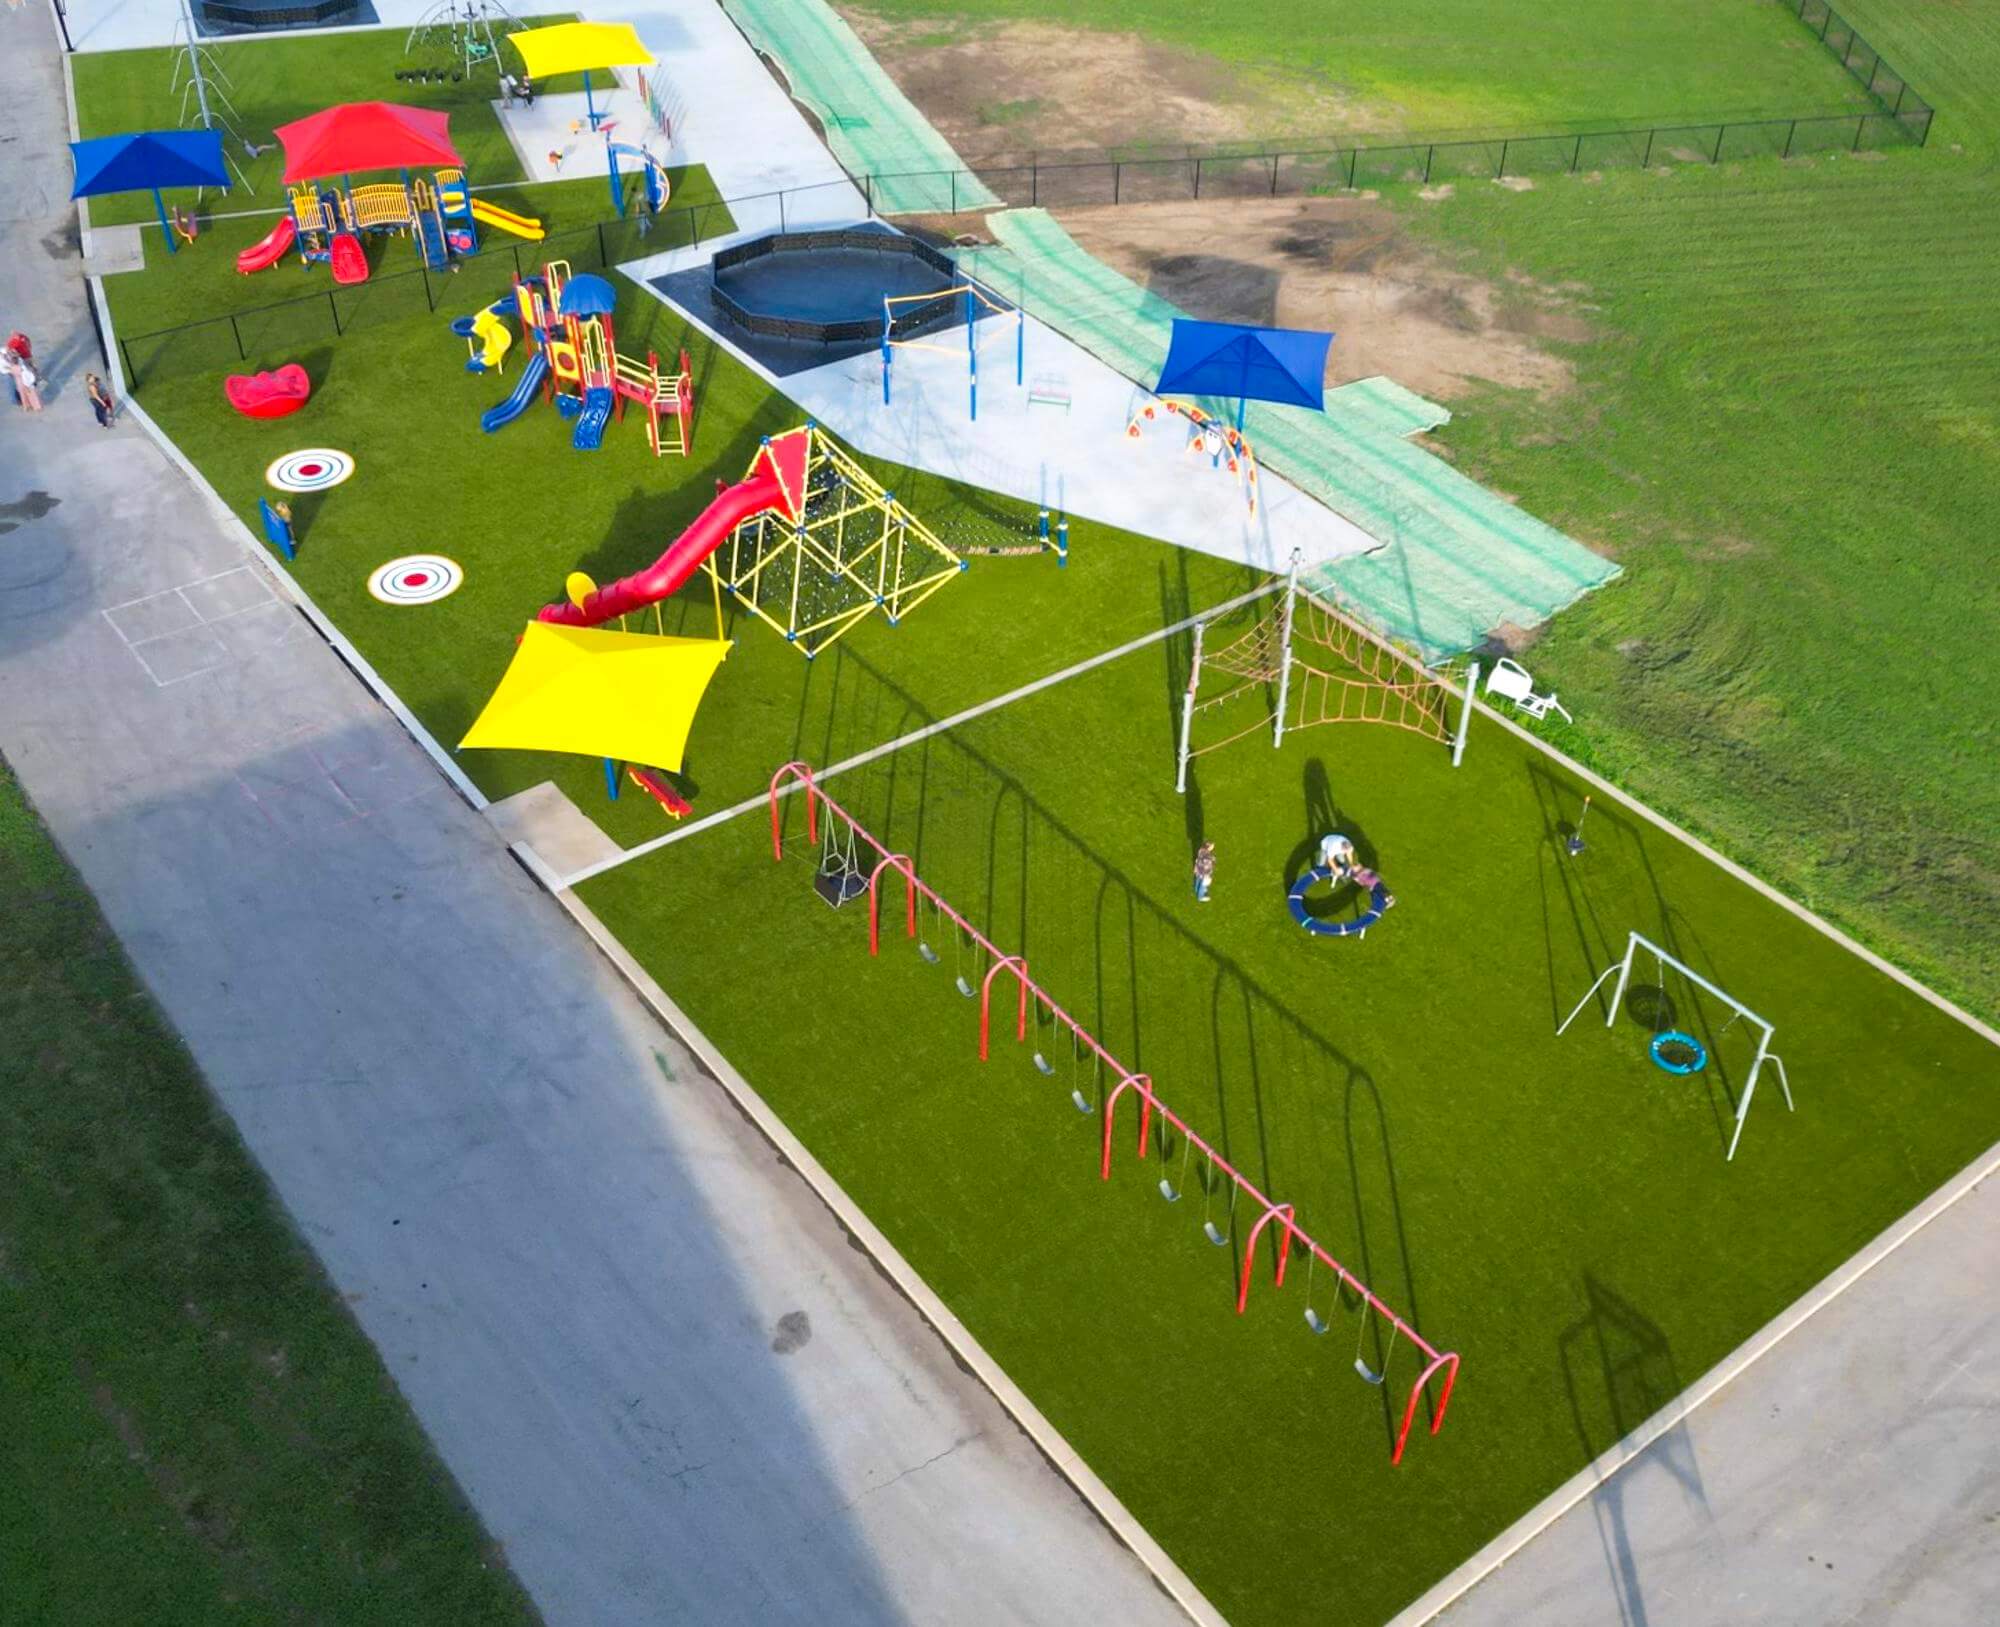 High angle view of a colorful playground with swings, slides, and a climbing net, set within a green artificial turf field.